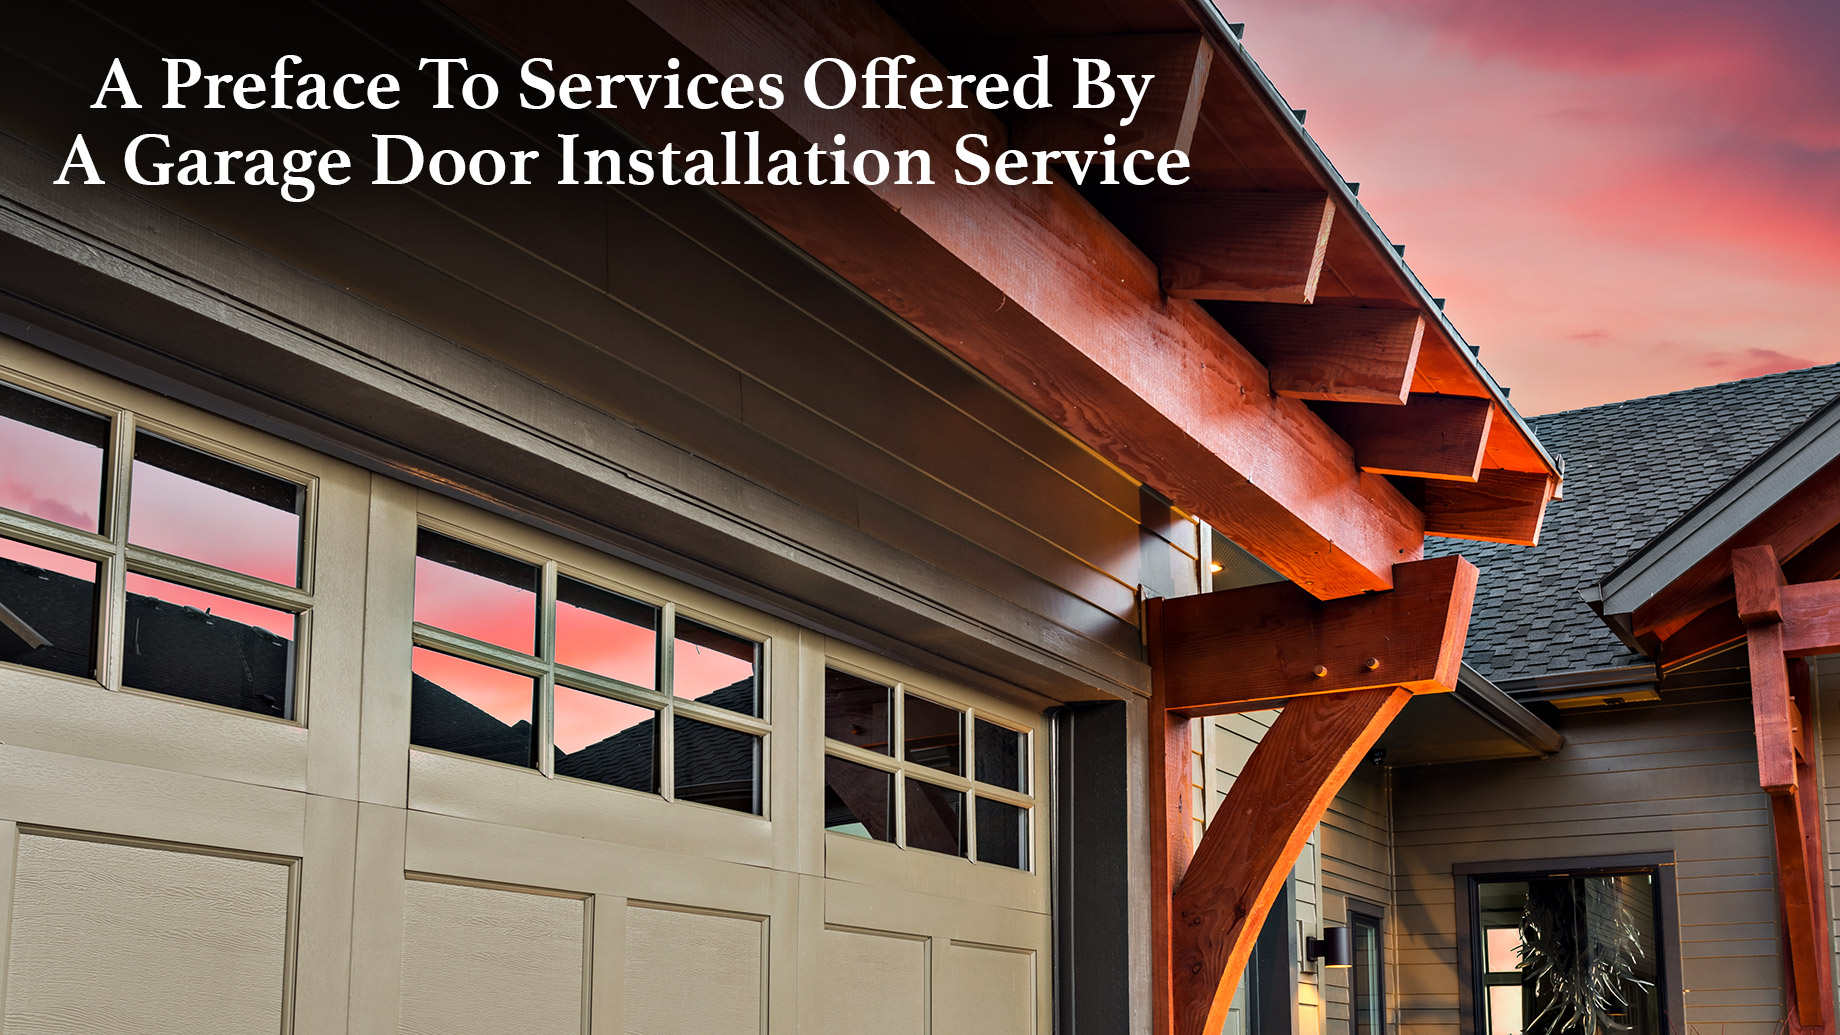 A Preface To Services Offered By A Garage Door Installation Service